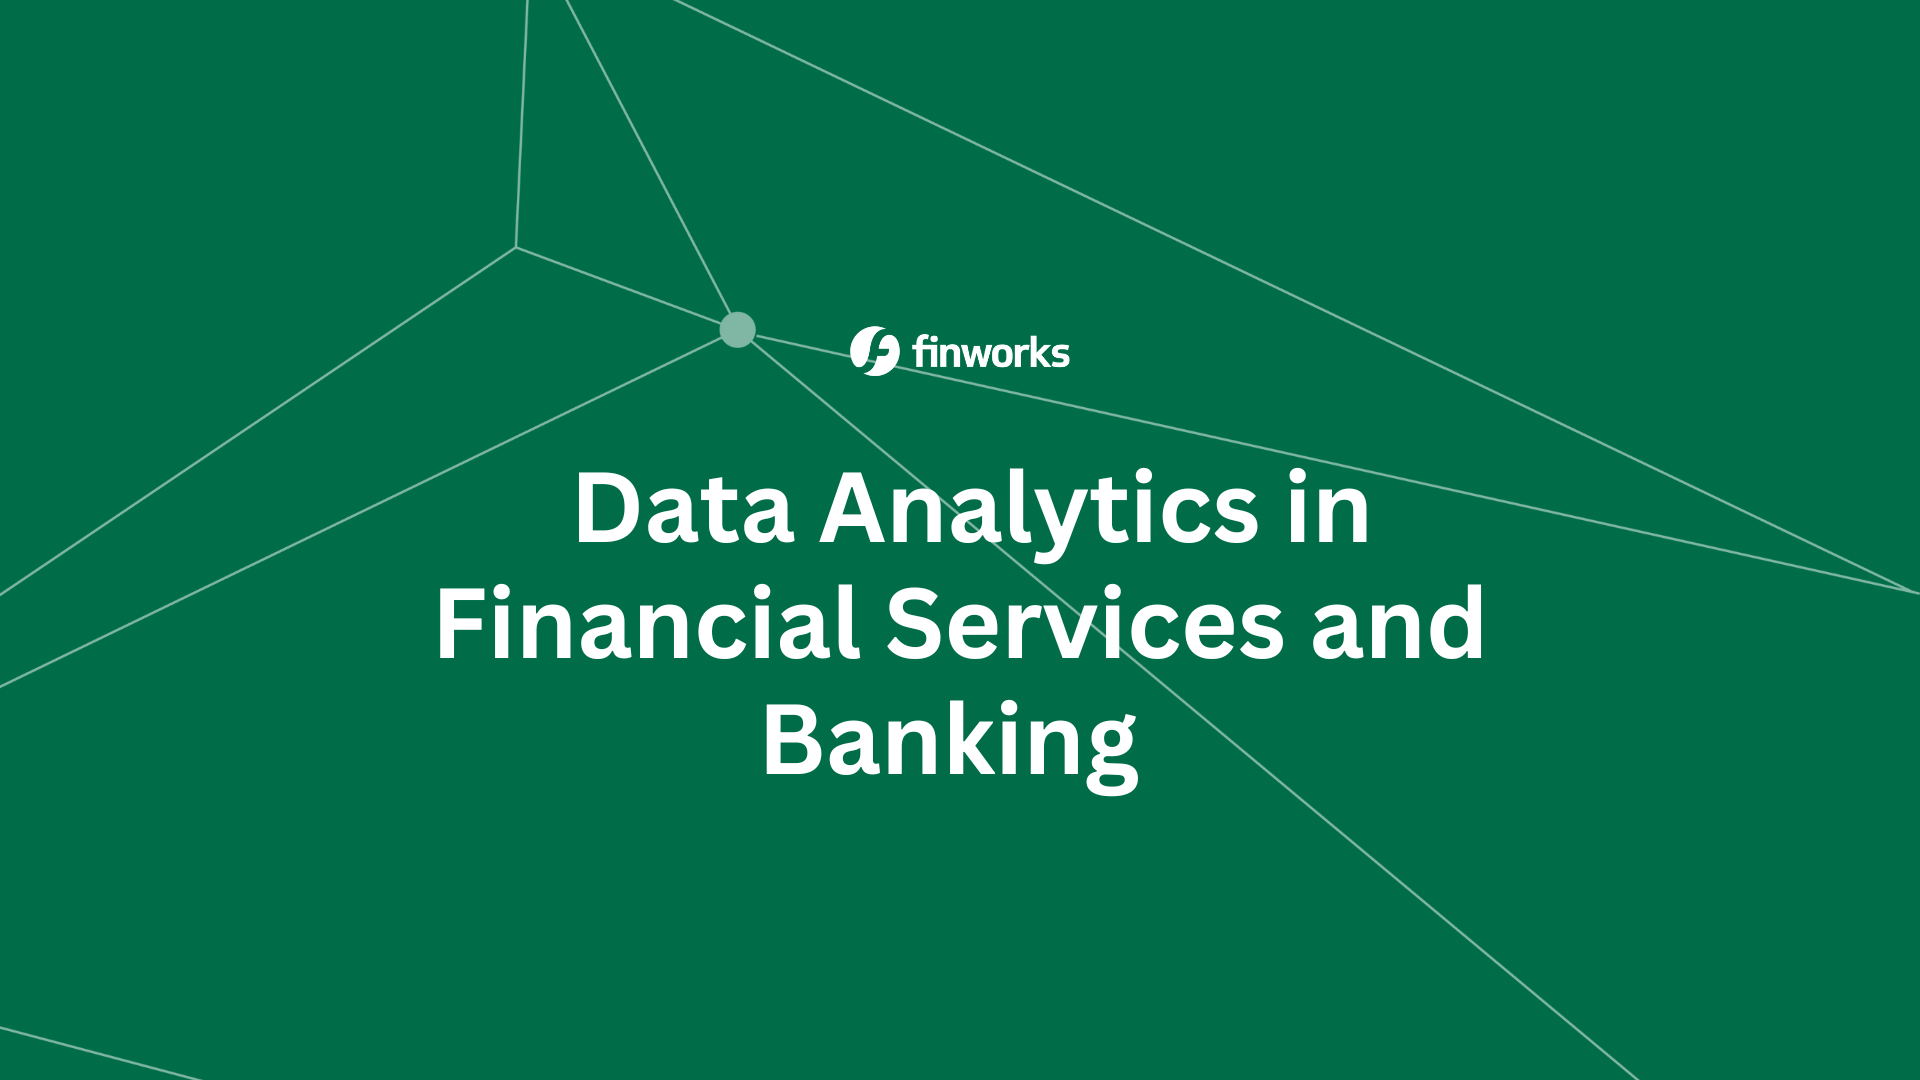 Data Analytics in Financial Services and Banking 